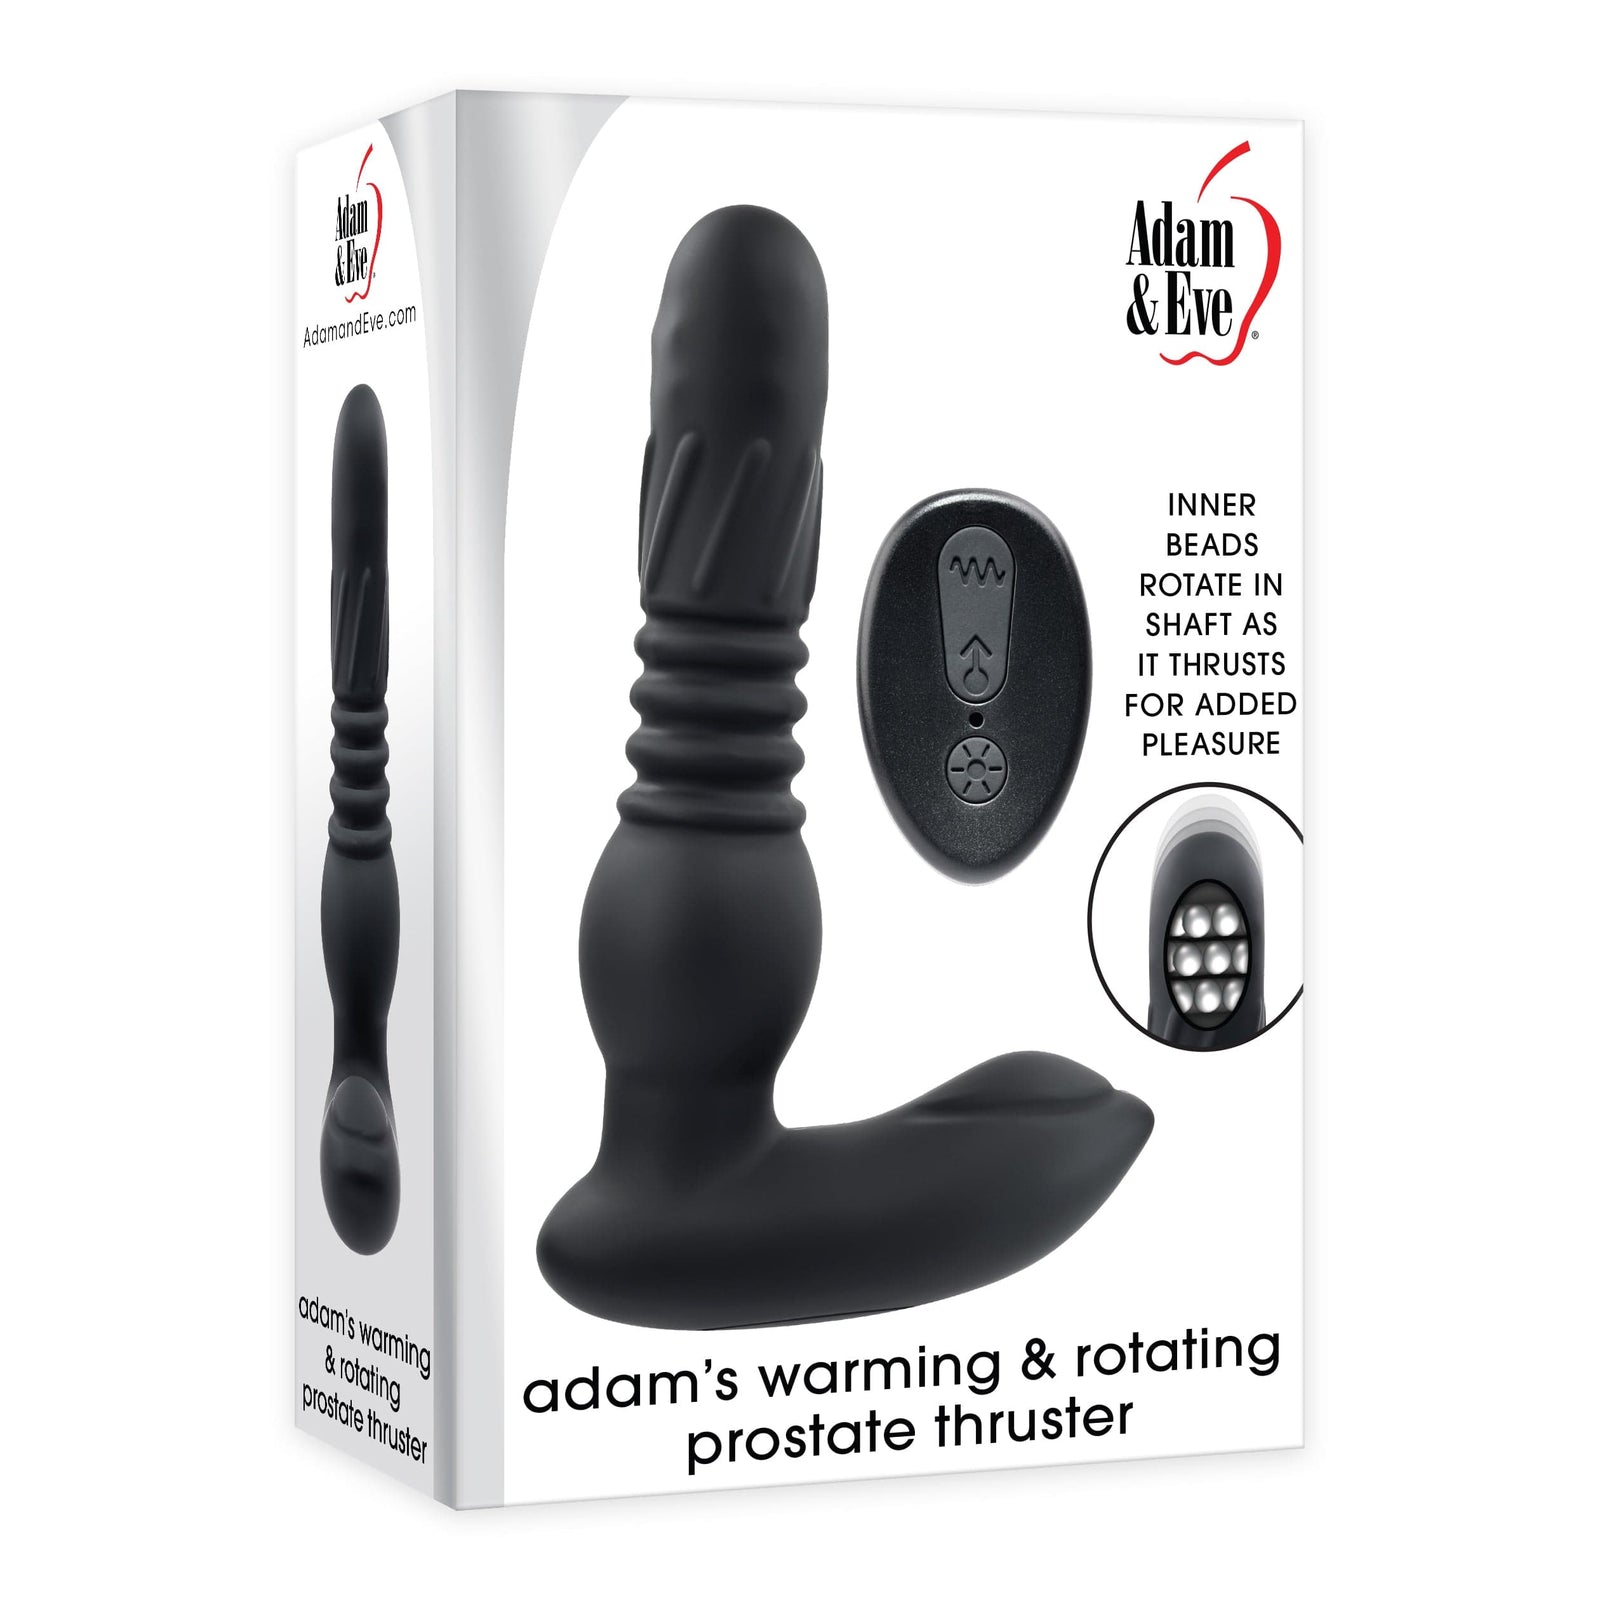 Adam & Eve - Adam's Remote Warming and Rotating Prostate Thruster Massager (Black) Prostate Massager (Vibration) Rechargeable 844477019338 CherryAffairs